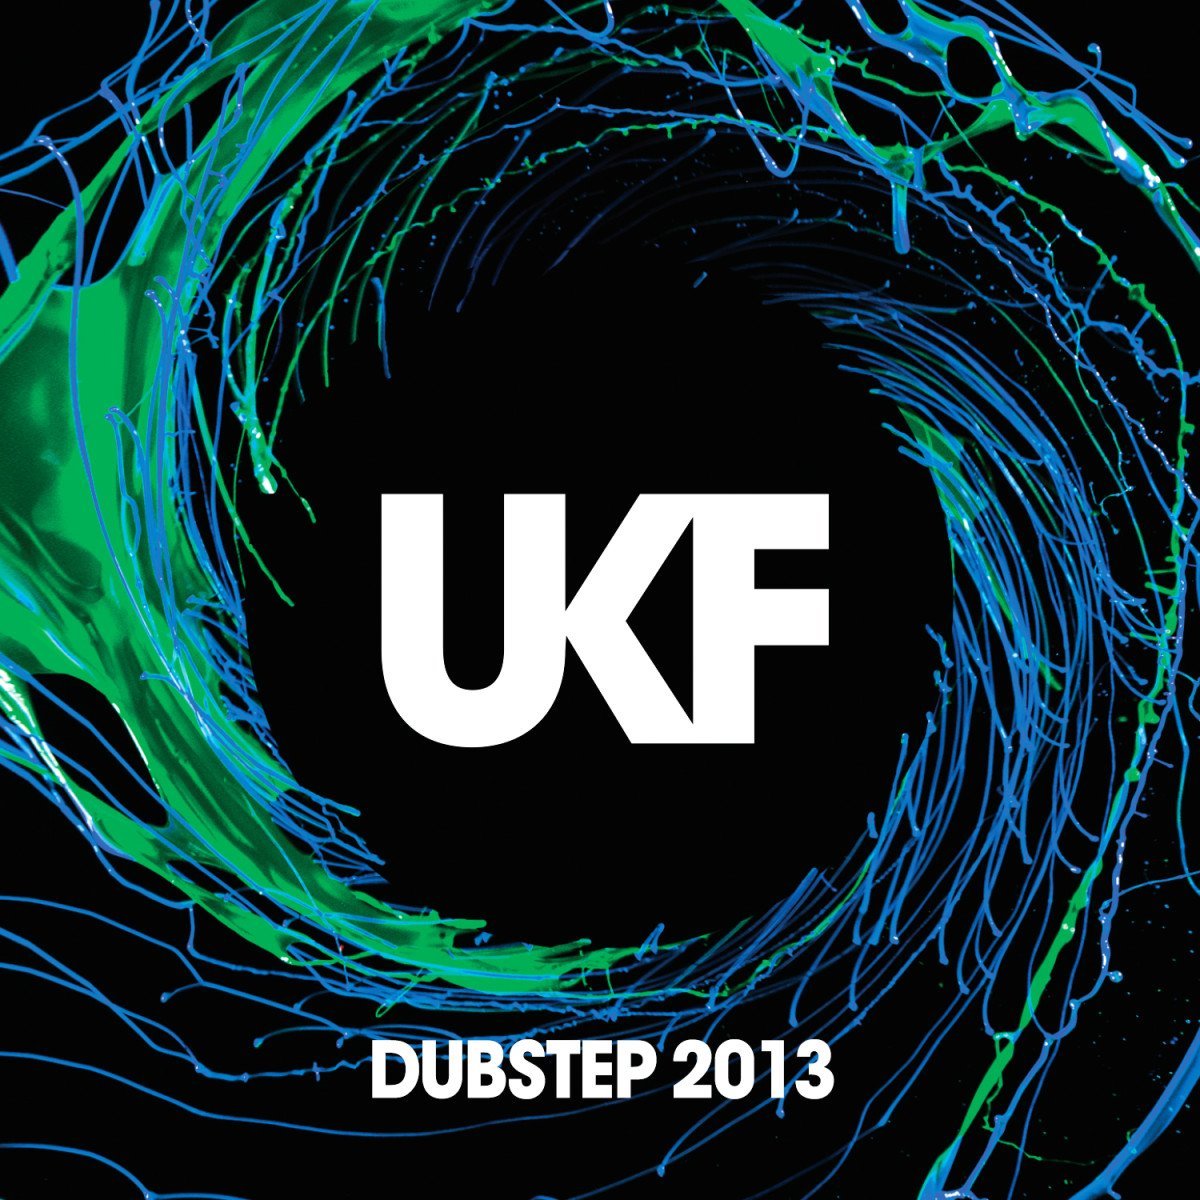 News Added Nov 21, 2013 UKF are back with another dubstep album. Keeping up their yearly tradition of releasing an album filled with the freshest and filthiest dubstep tracks of 2013. No word on a tracklist yet, but this will surely follow soon, as the album was only announced recently. UPDATE1:Tracklist added UPDATE2: Release date […]